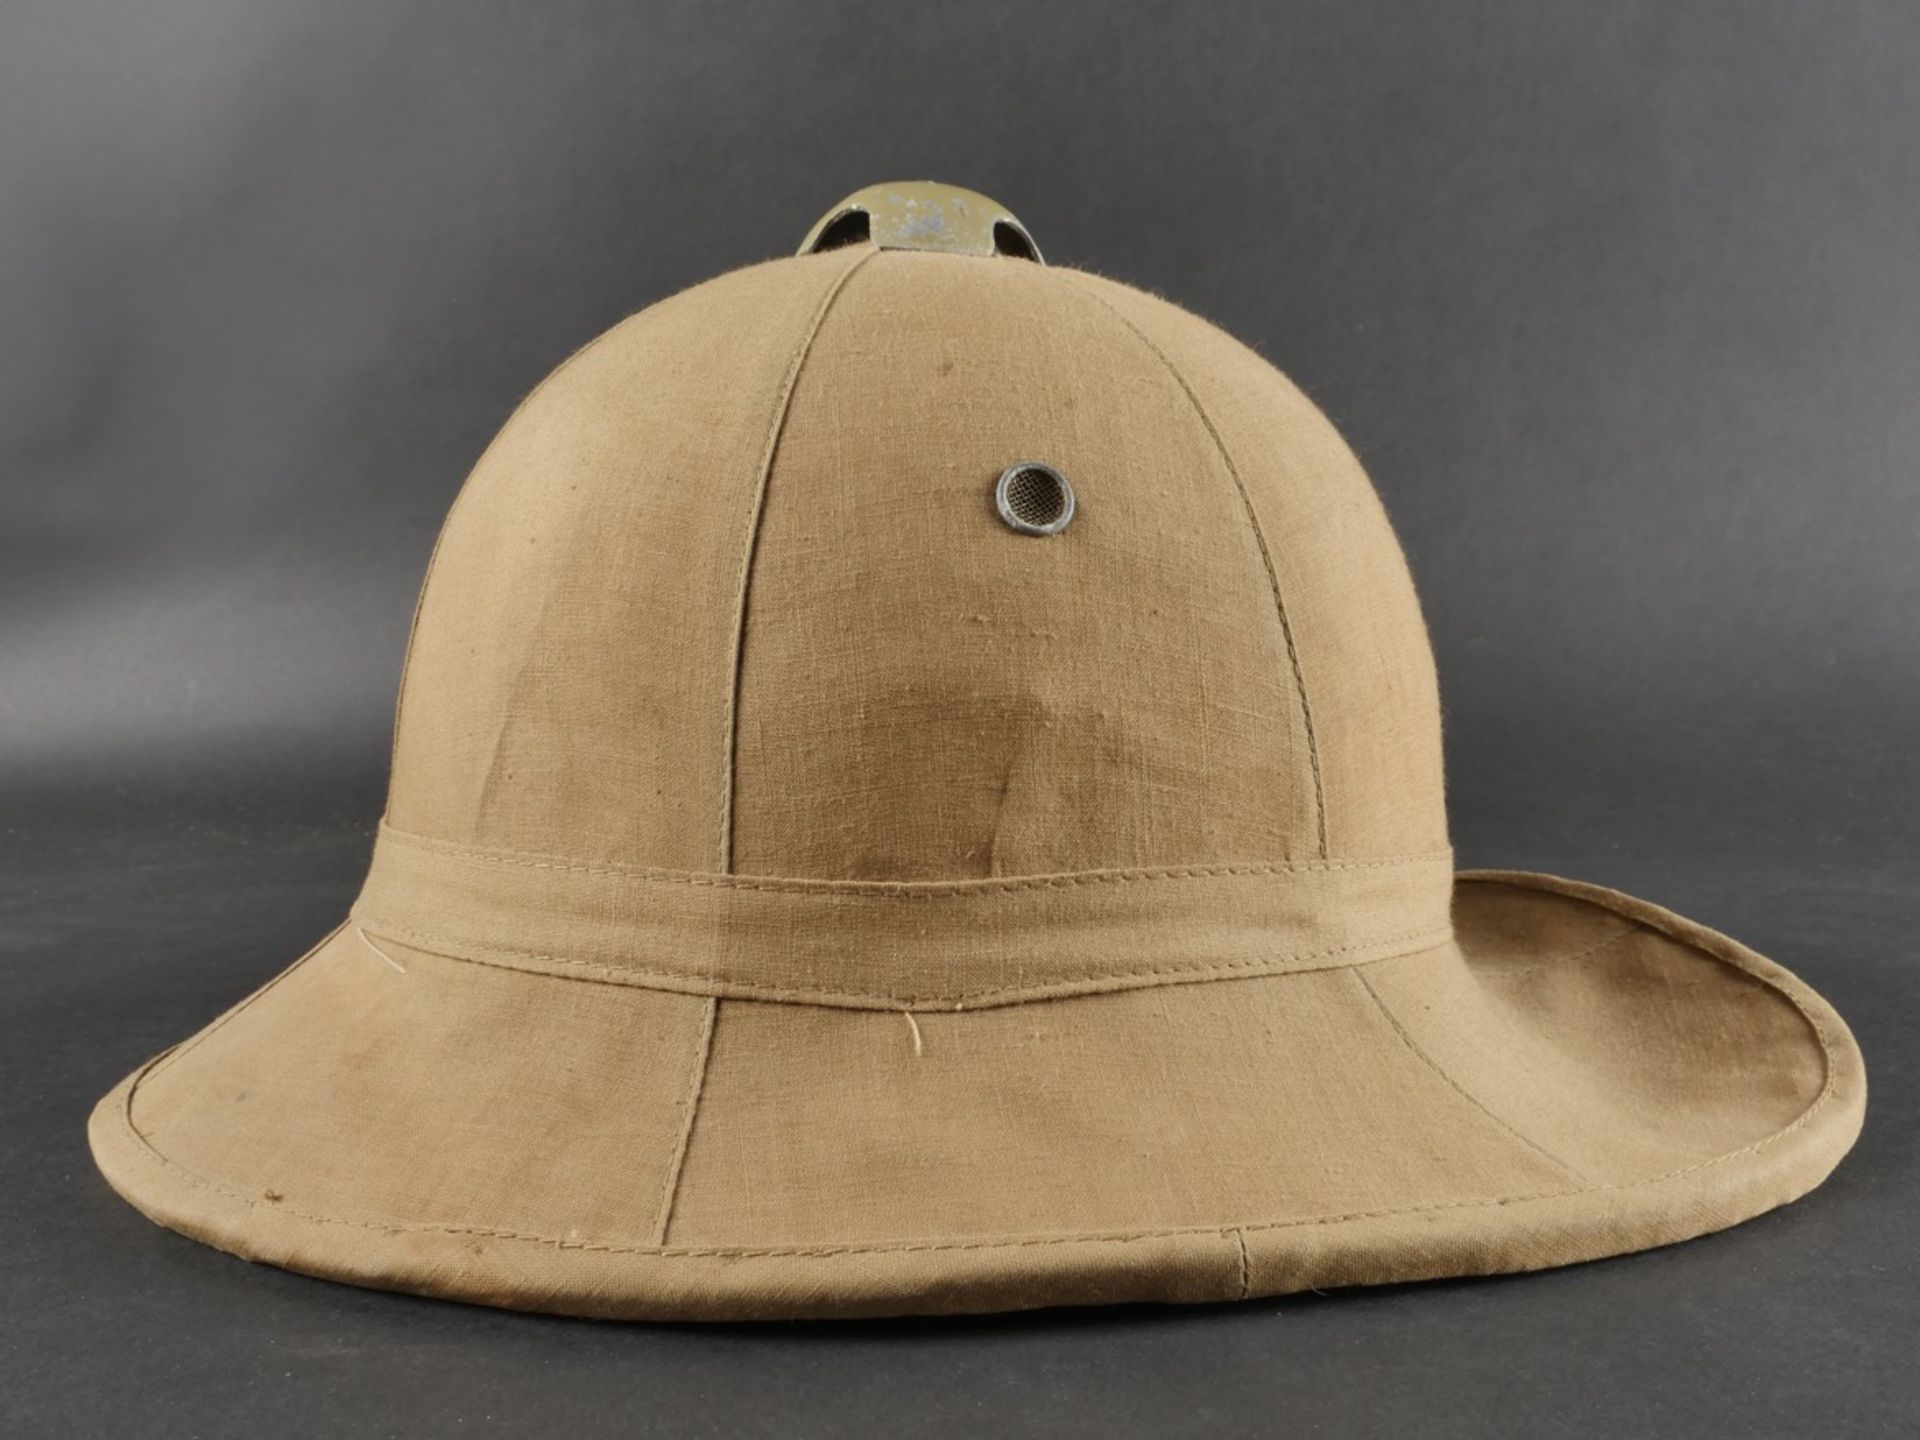 Casque tropical de larmee Royale italienne. Tropical helmet of the Royal Italian Army. - Image 6 of 16